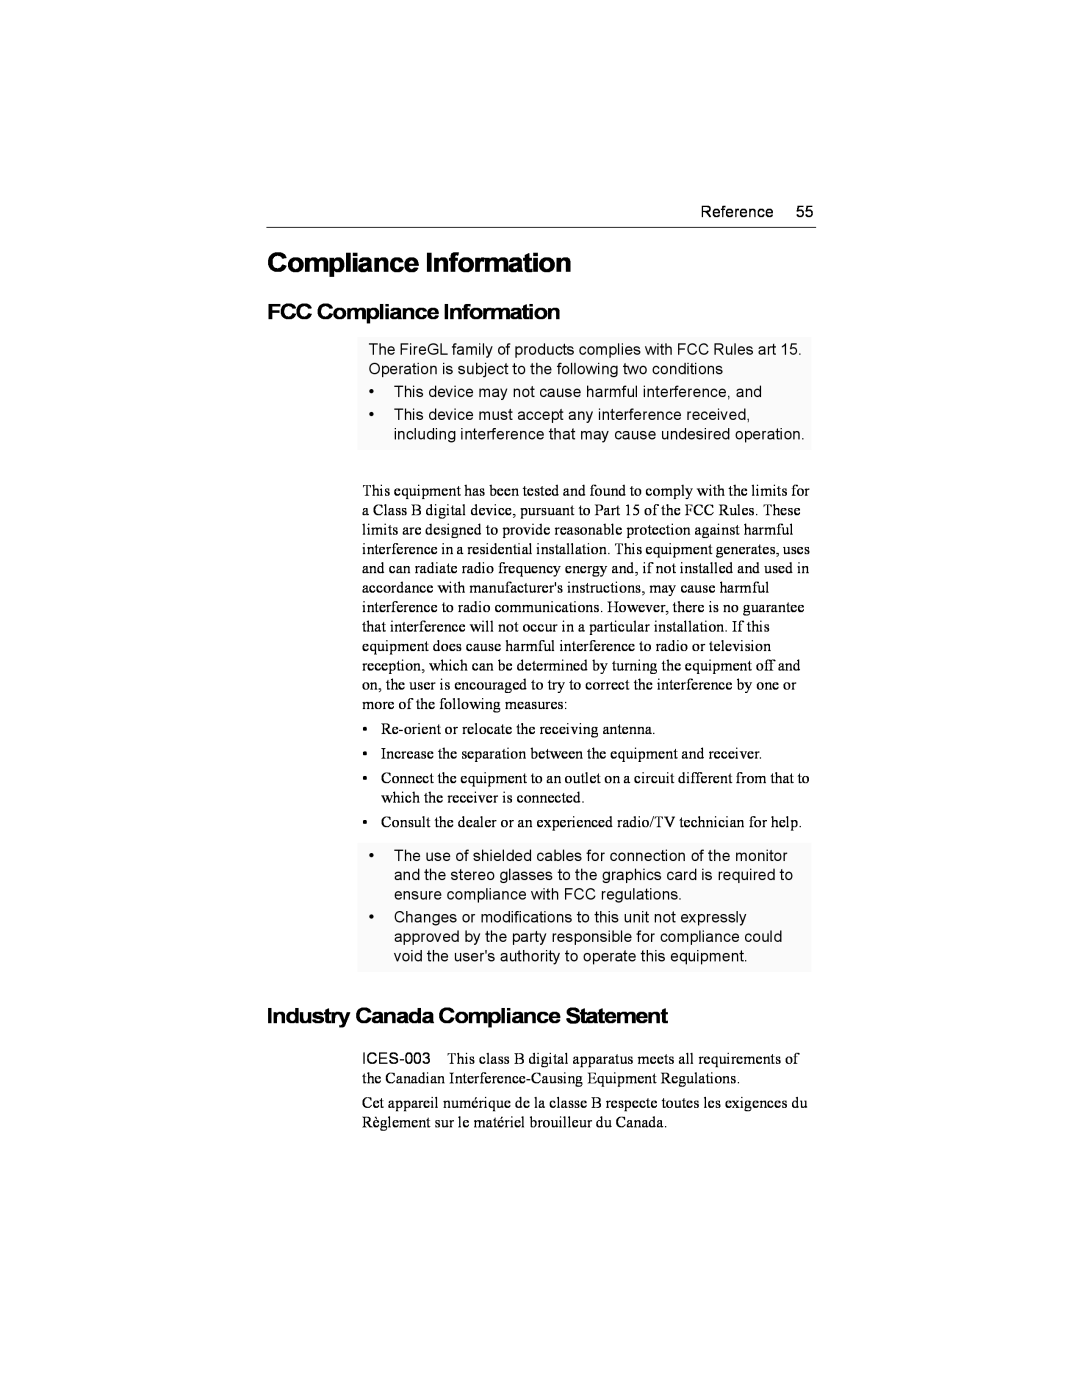 ATI Technologies X1-256P, Z1-128p specifications FCC Compliance Information, Industry Canada Compliance Statement 